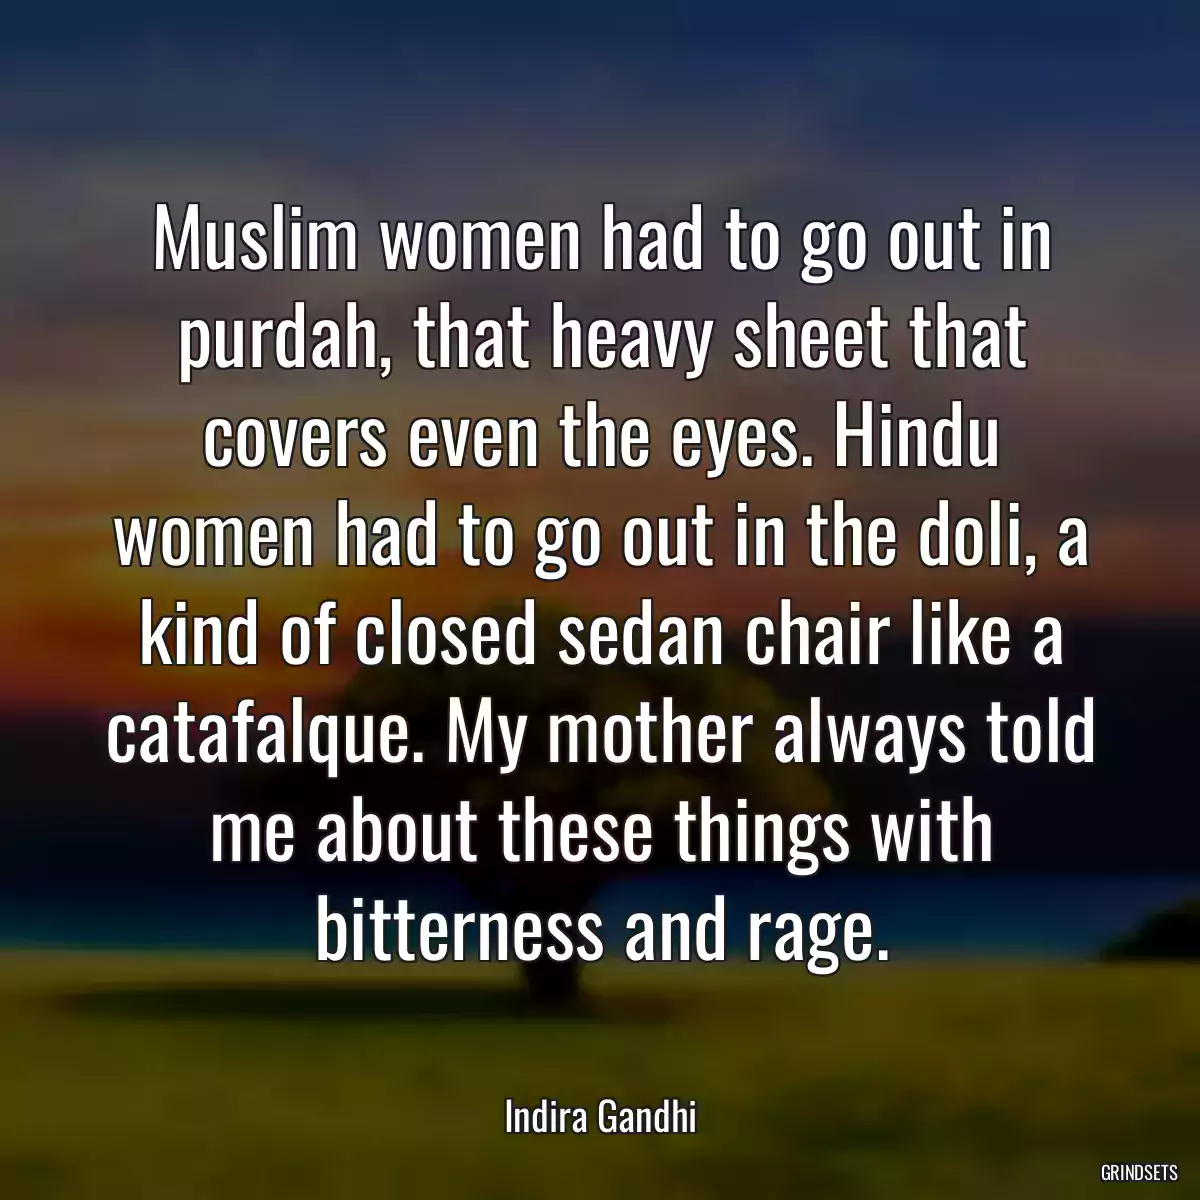 Muslim women had to go out in purdah, that heavy sheet that covers even the eyes. Hindu women had to go out in the doli, a kind of closed sedan chair like a catafalque. My mother always told me about these things with bitterness and rage.